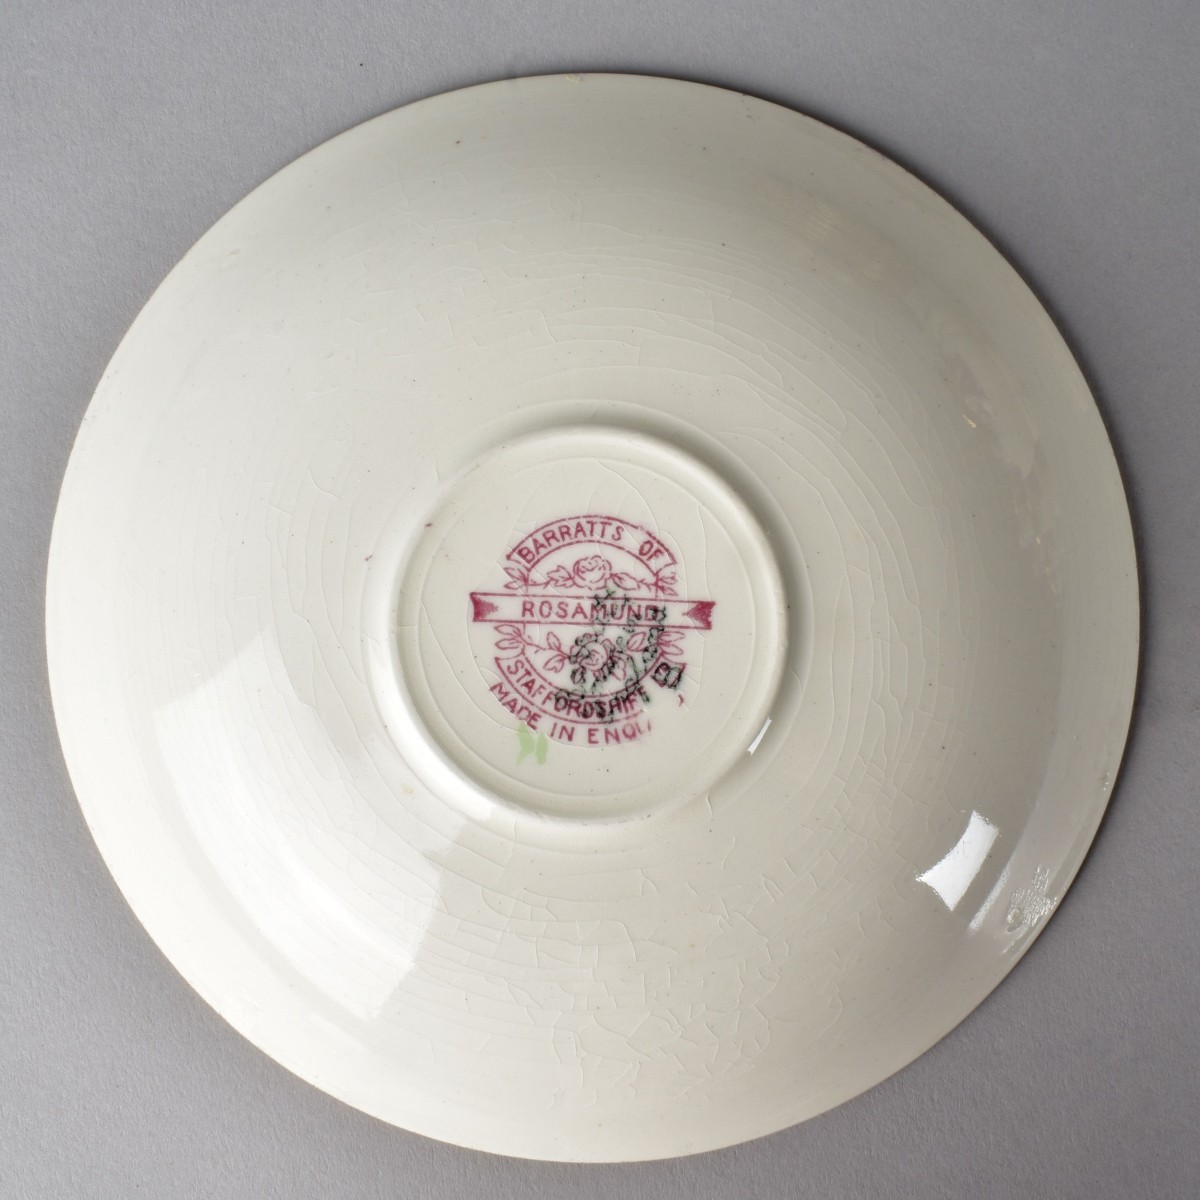 (40) Pc. Staffordshire Partial Dinner Service